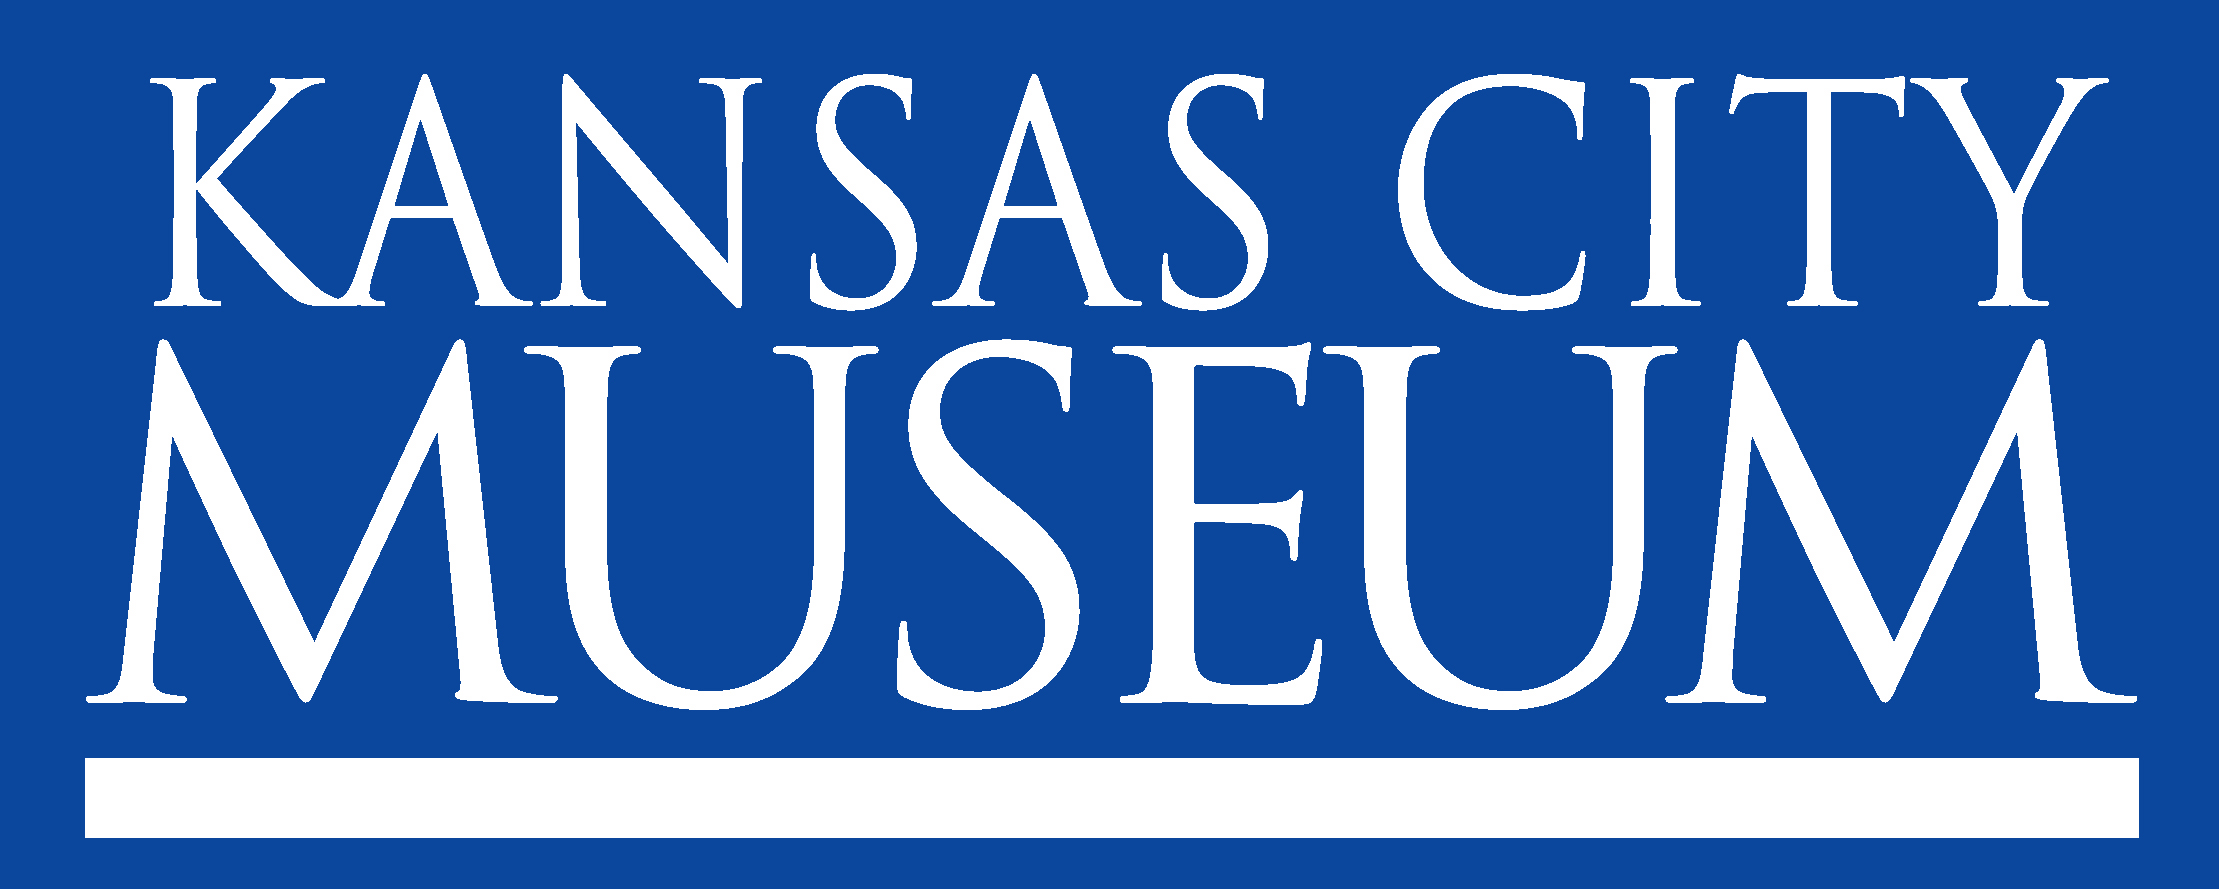 Hosted by Kansas City Museum